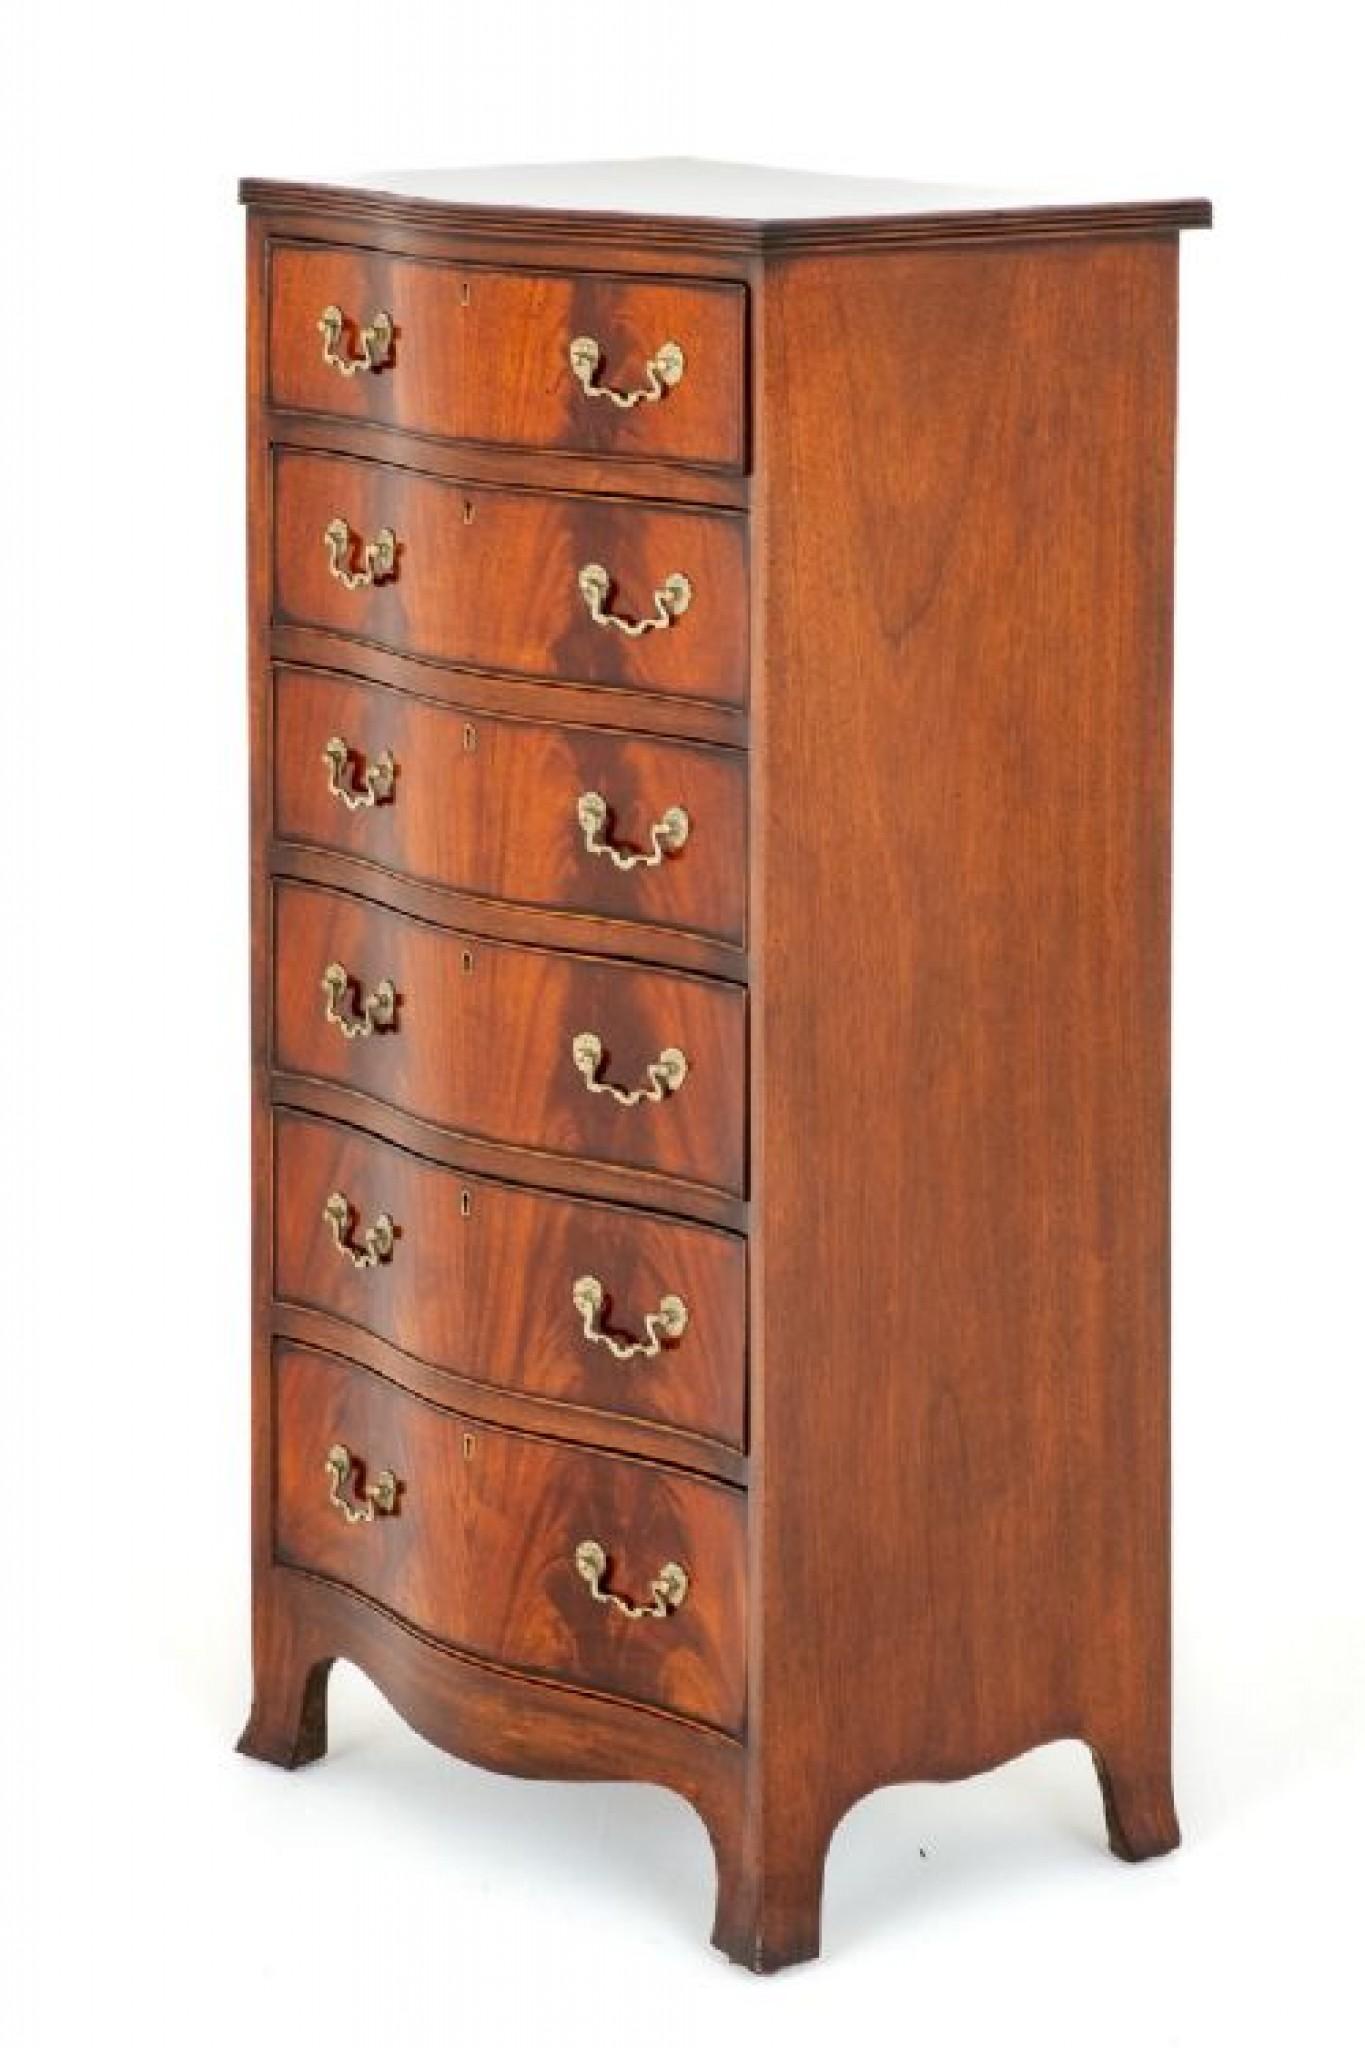 Mahogany Serpentine Chest of Drawers.
Circa 1900
This chest of drawers stands upon splay feet with a shaped apron.
Having an arrangement of 6 graduated oak lined drawers.
The drawer fronts and top of the chest having wonderful flame mahogany